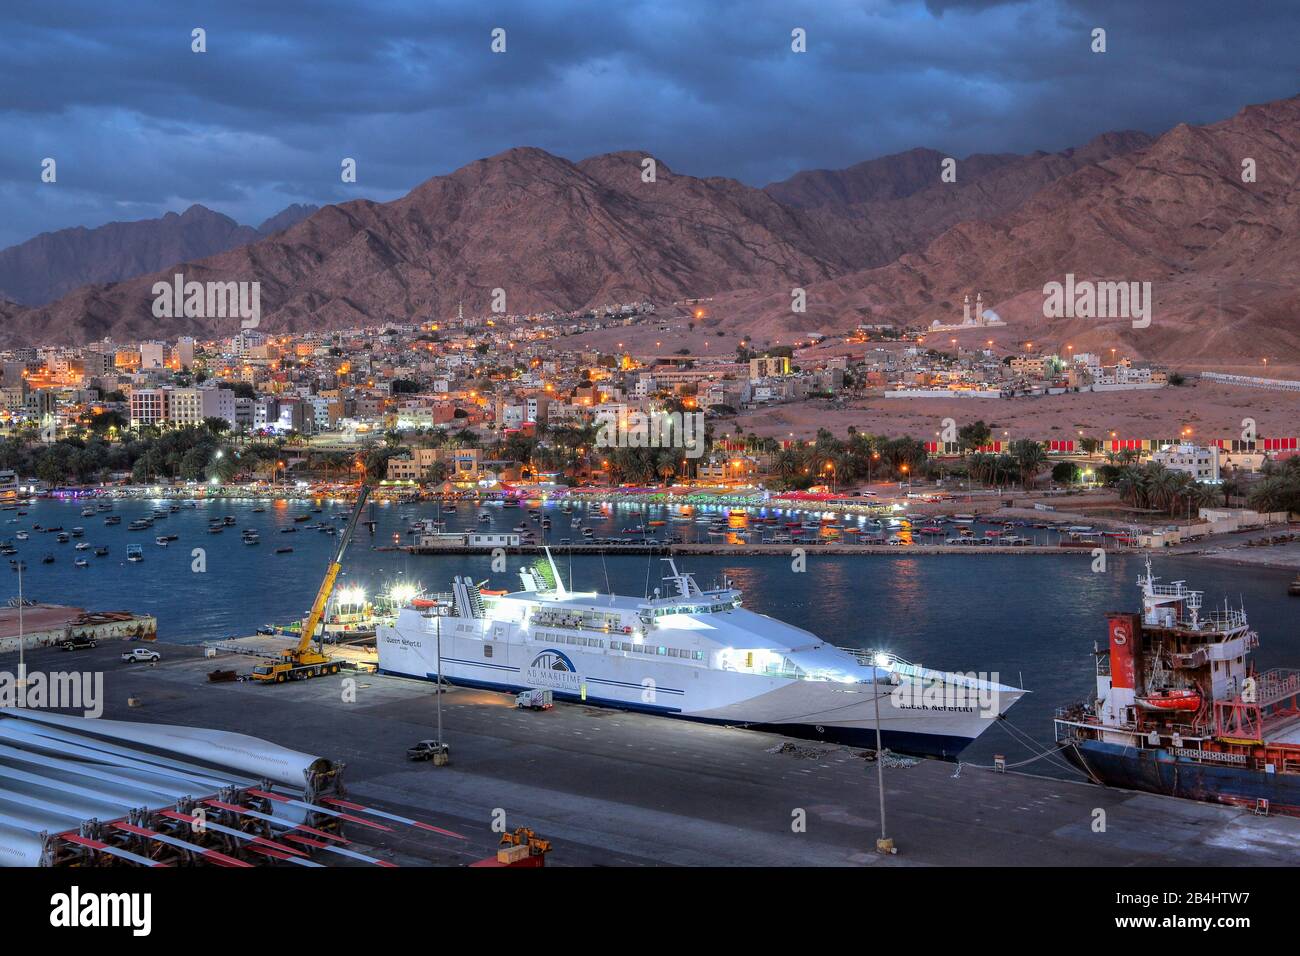 Ferry in the harbor against the city with water front and mountains at night, Aqaba Aqaba, Gulf of Aqaba, Red Sea, Jordan Stock Photo